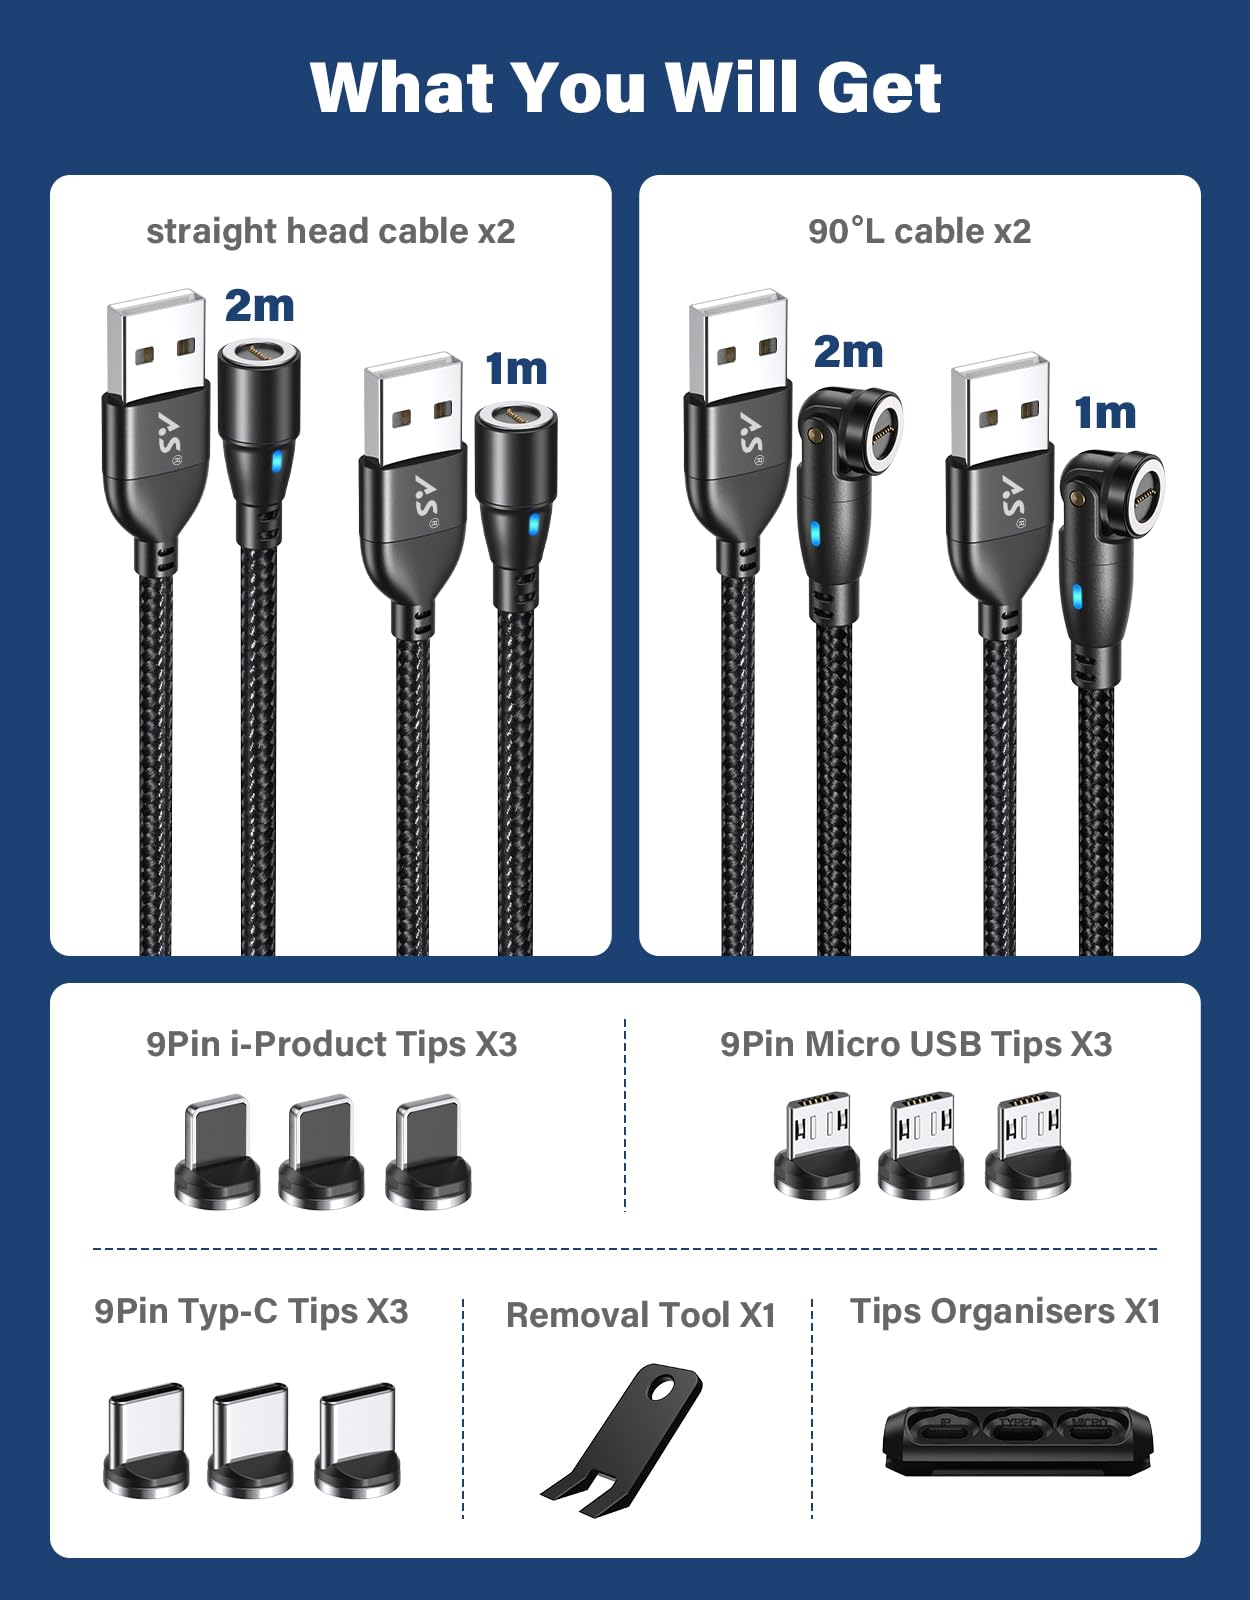 A.S Magnetic Charging Cable[4PACK, 3.3/3.3/6.6/6.6ft]-3 in 1 Magnetic Phone Charger Data Transfer Cord-Magnetic USB C Charging Cable-Magnetic Charger Cable for Micro USB/TypeC/iPhone Nylon Braided